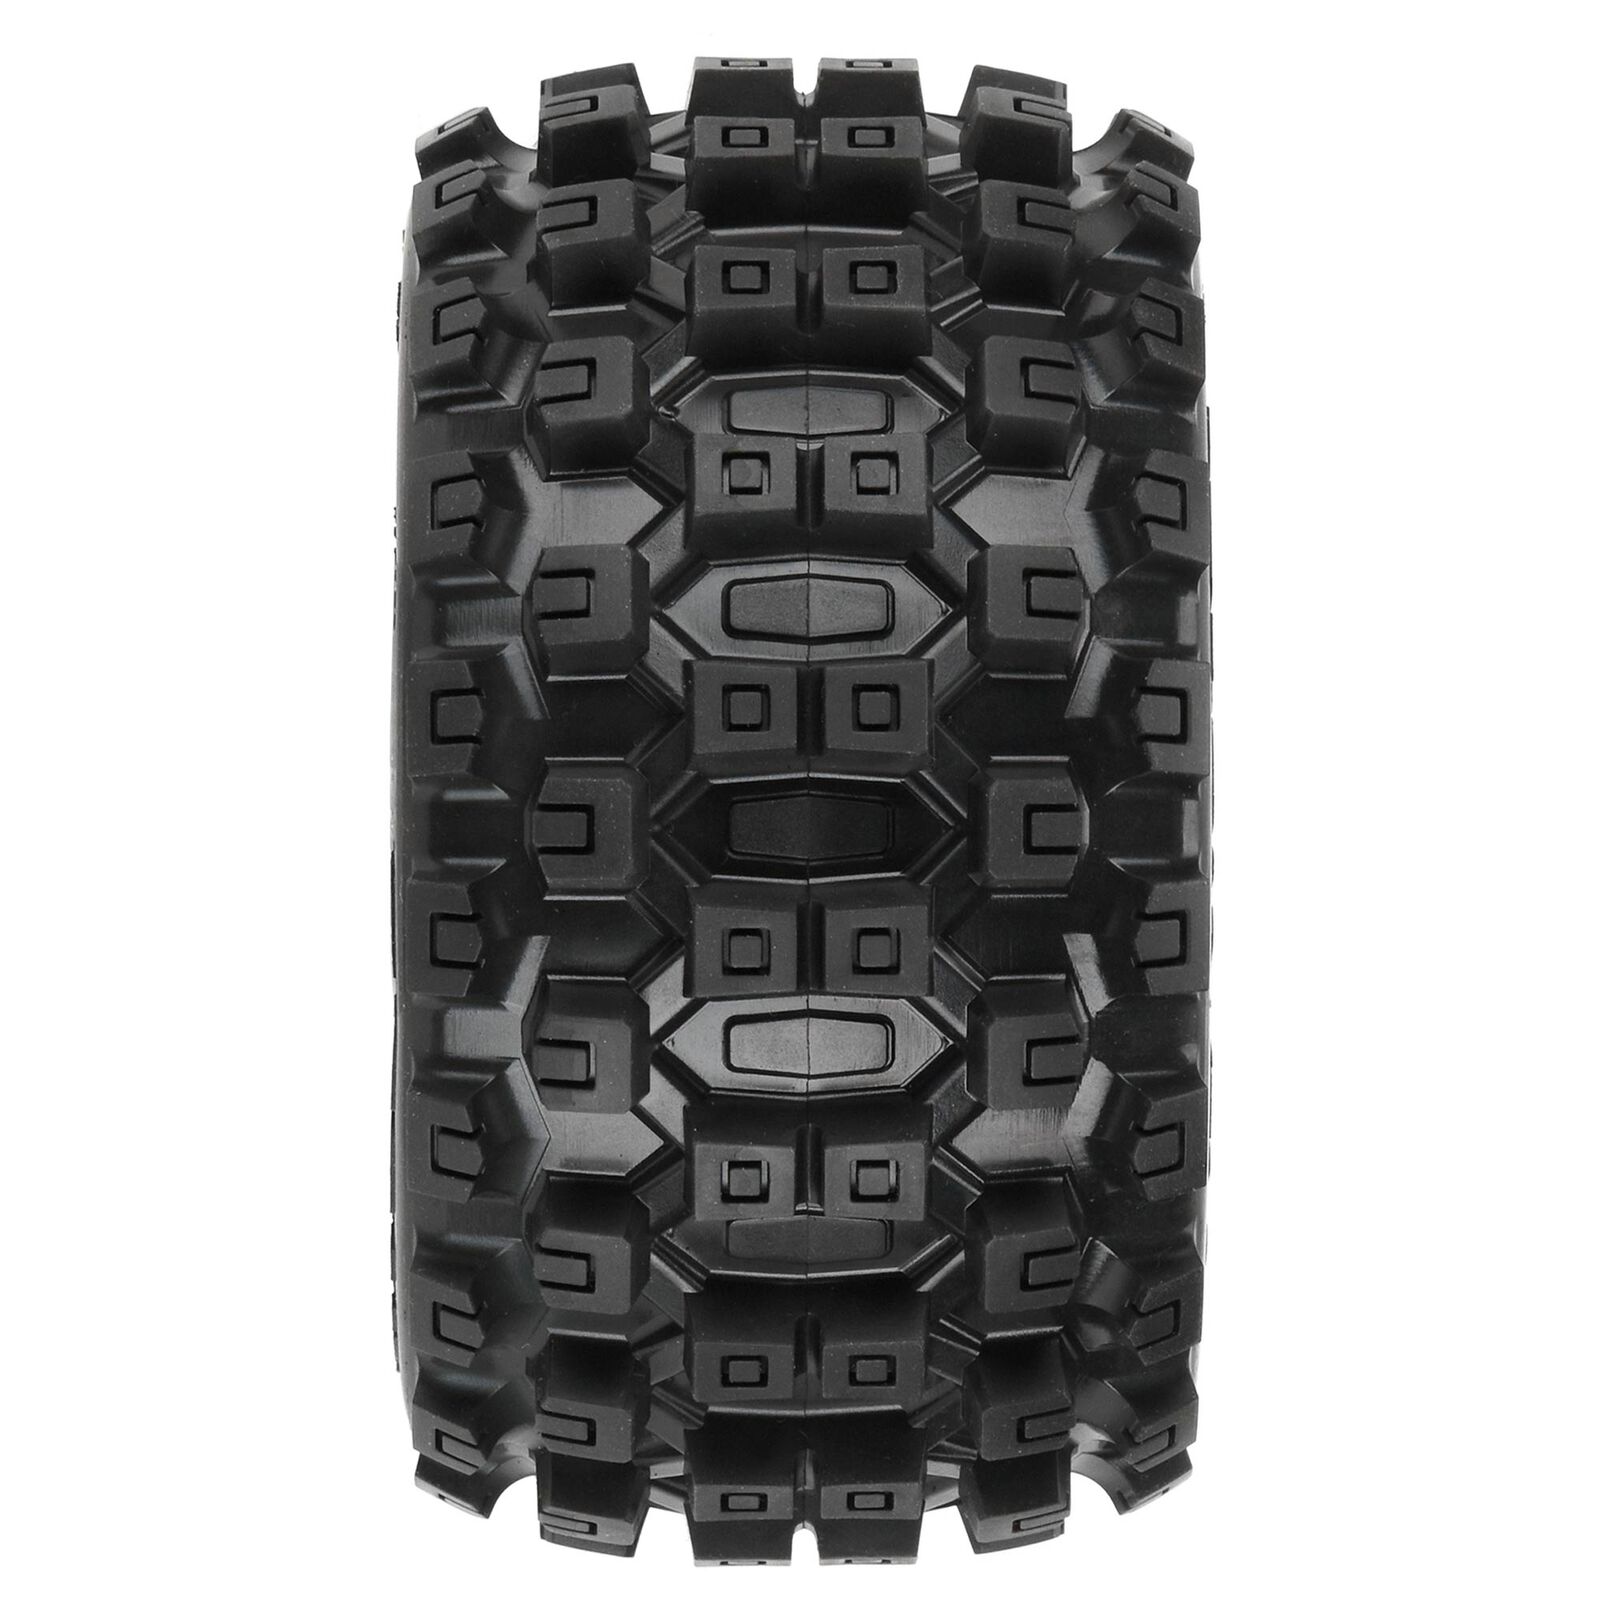 2 PRO1012500 for sale online Pro-line Racing Badlands Mx28 2.8 TRA Style Bead Truck Tire